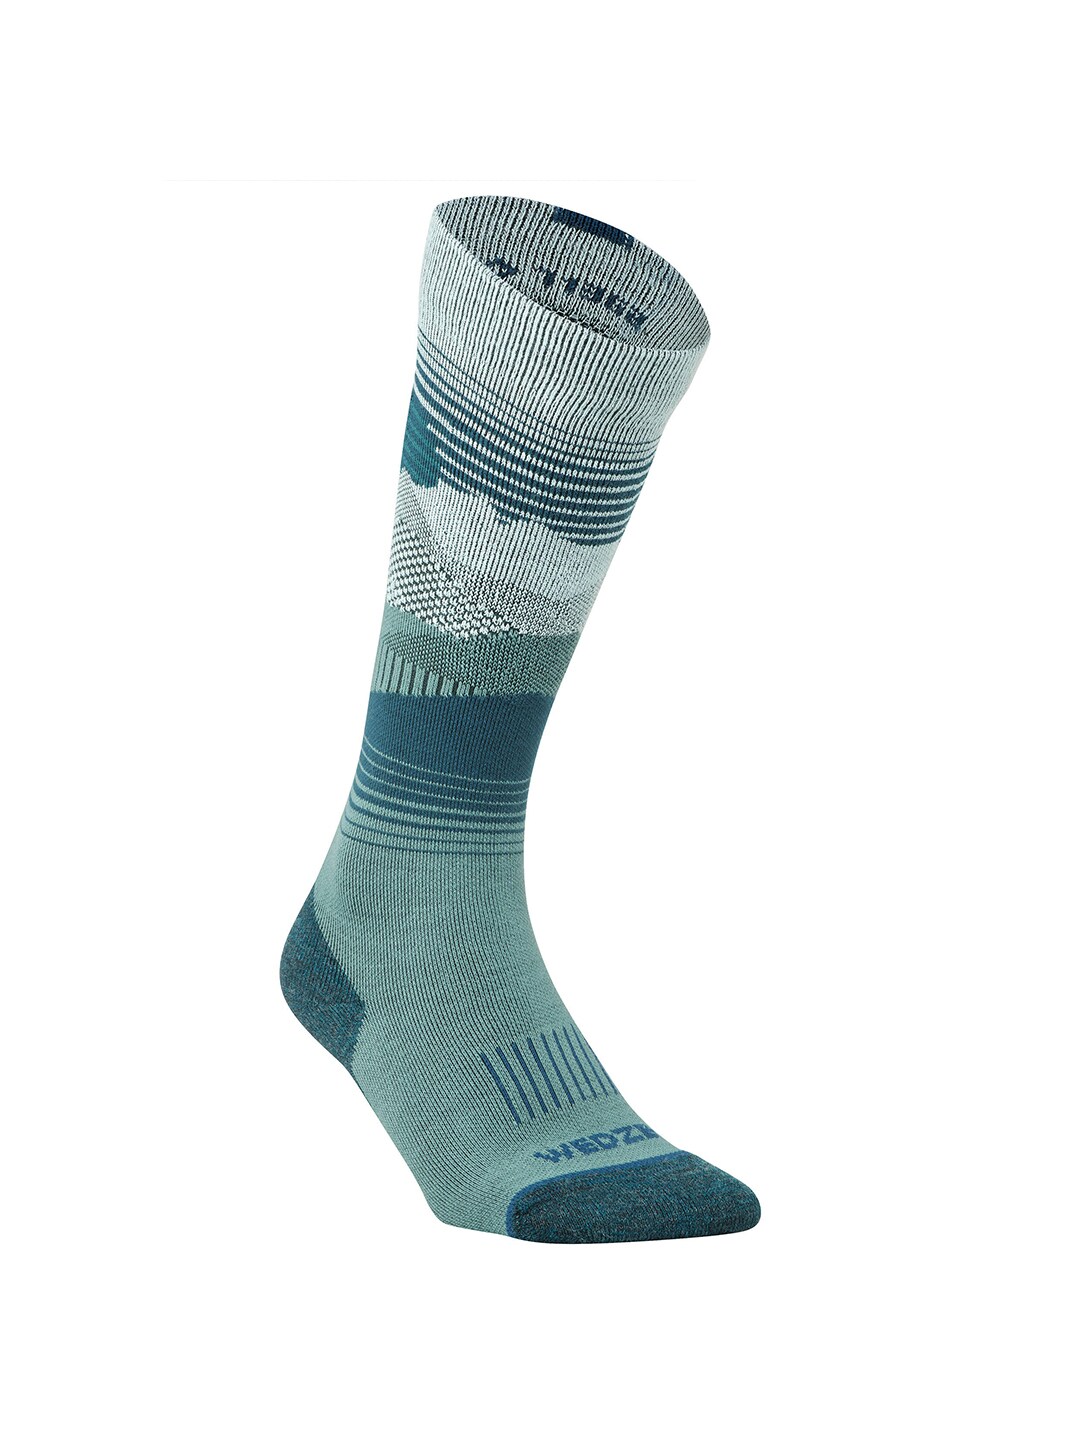 WEDZE By Decathlon Unisex Green Patterned Calf-Length Socks Price in India